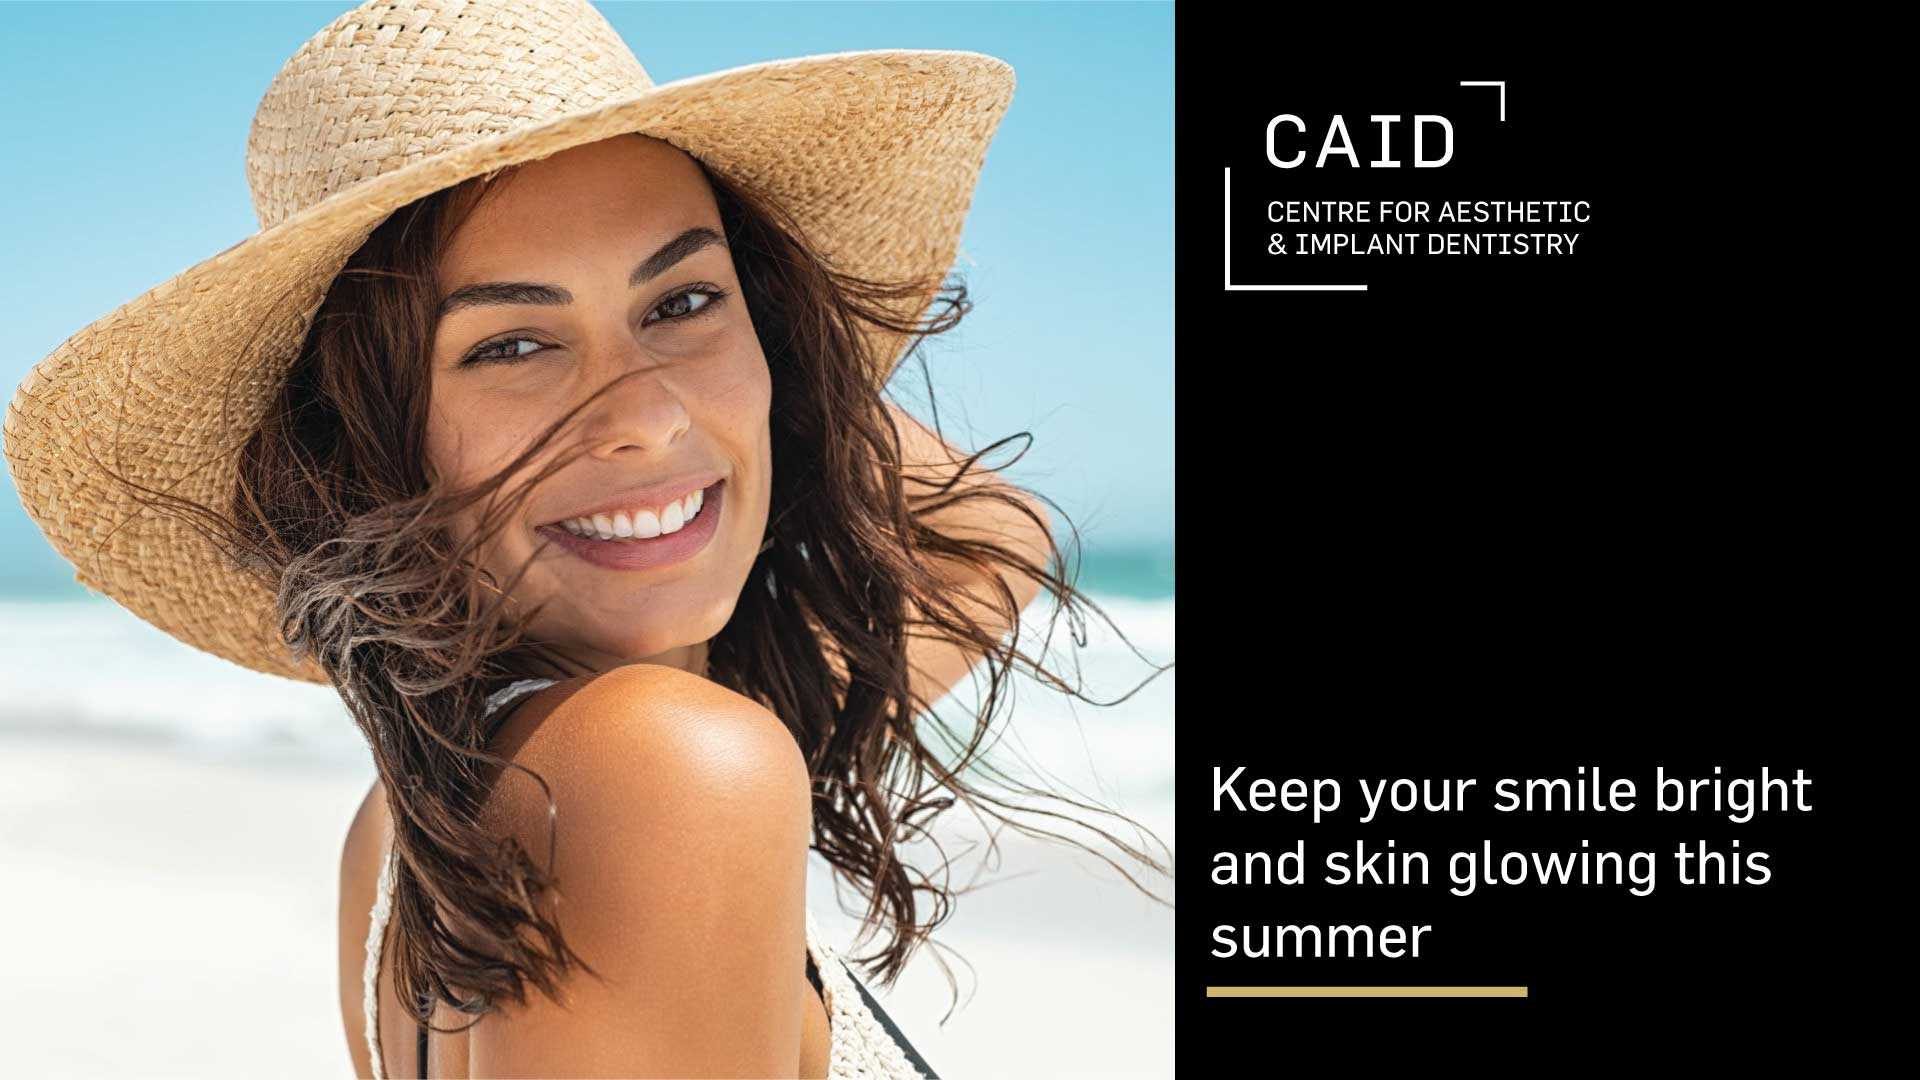 How to Keep Your Smile Bright and Skin Glowing this Summer